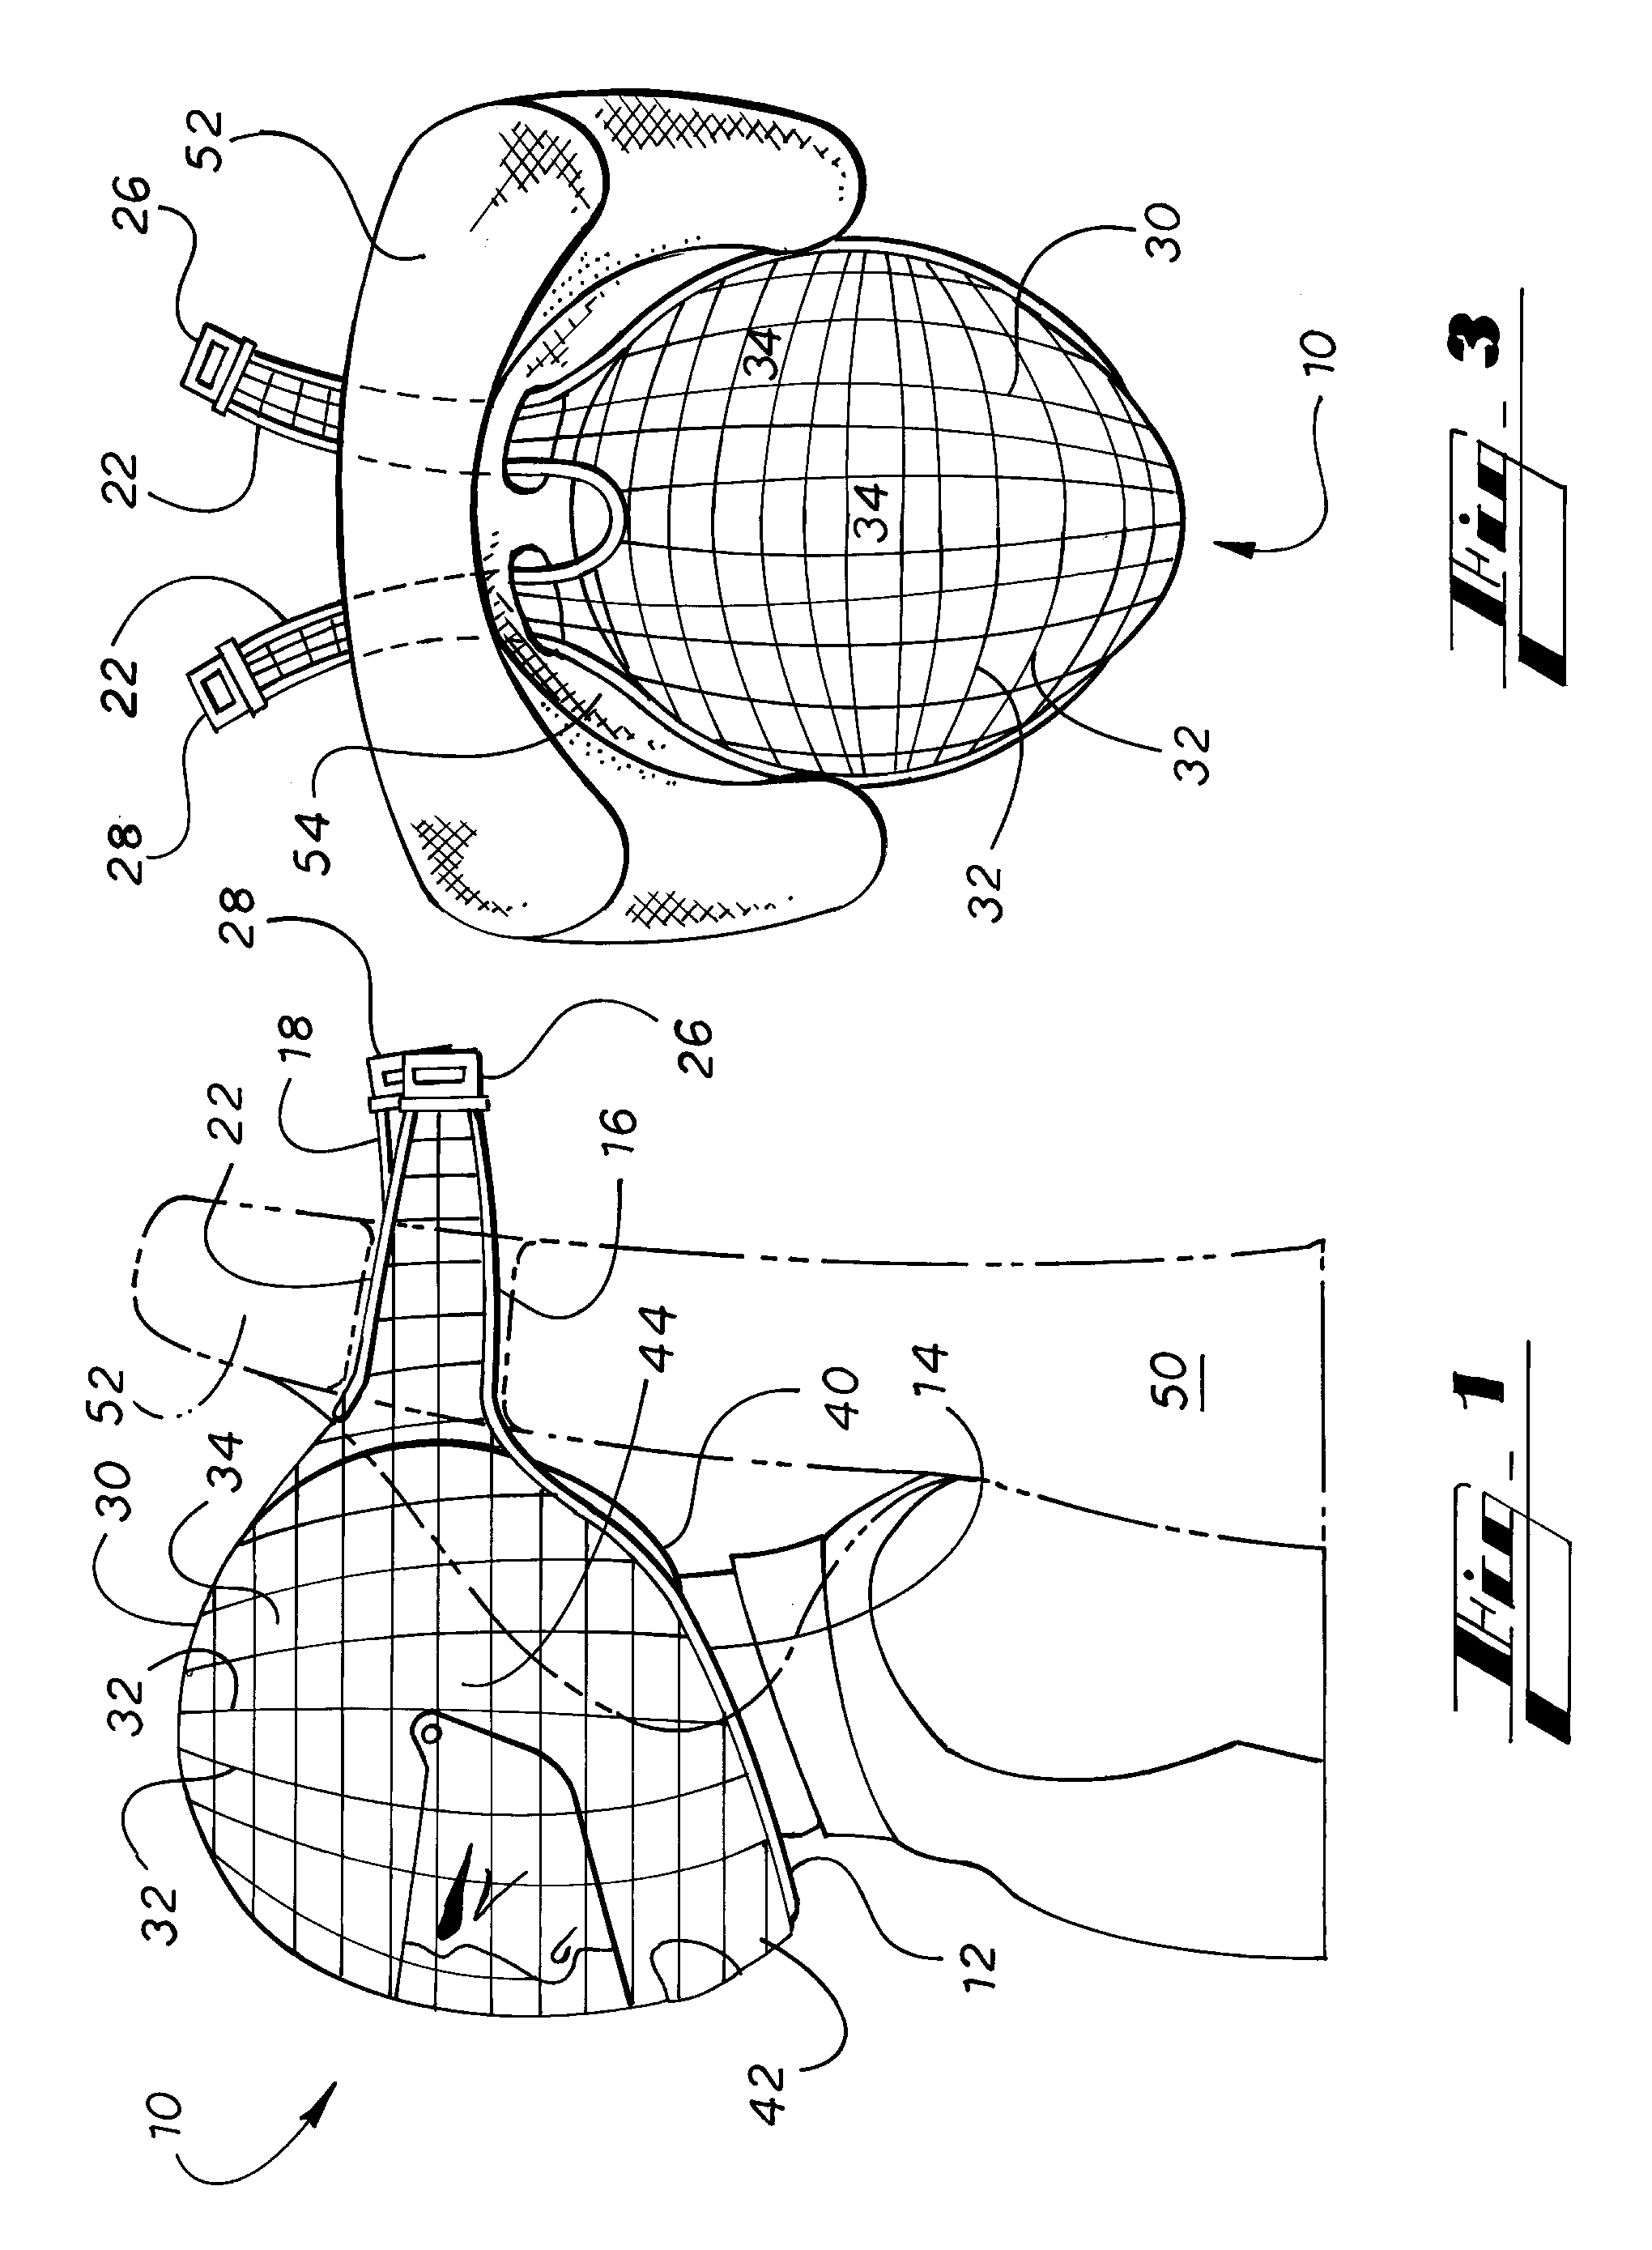 Vehicular head and neck safety system and method